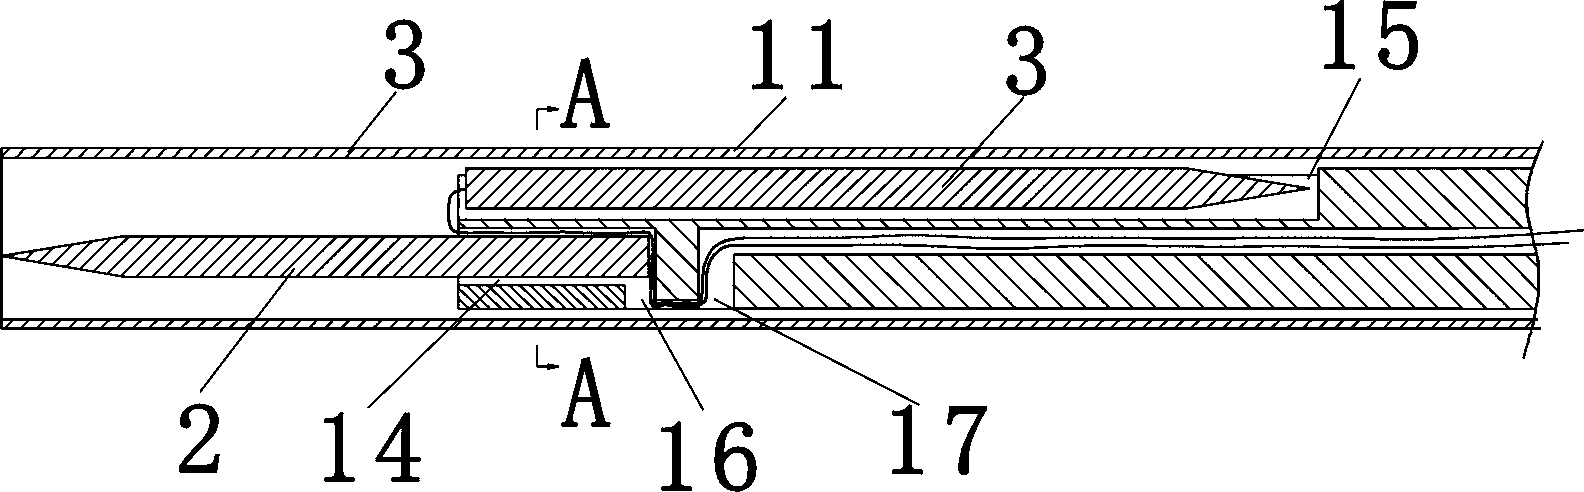 Endoscopic stomach wall suturing and ligating device